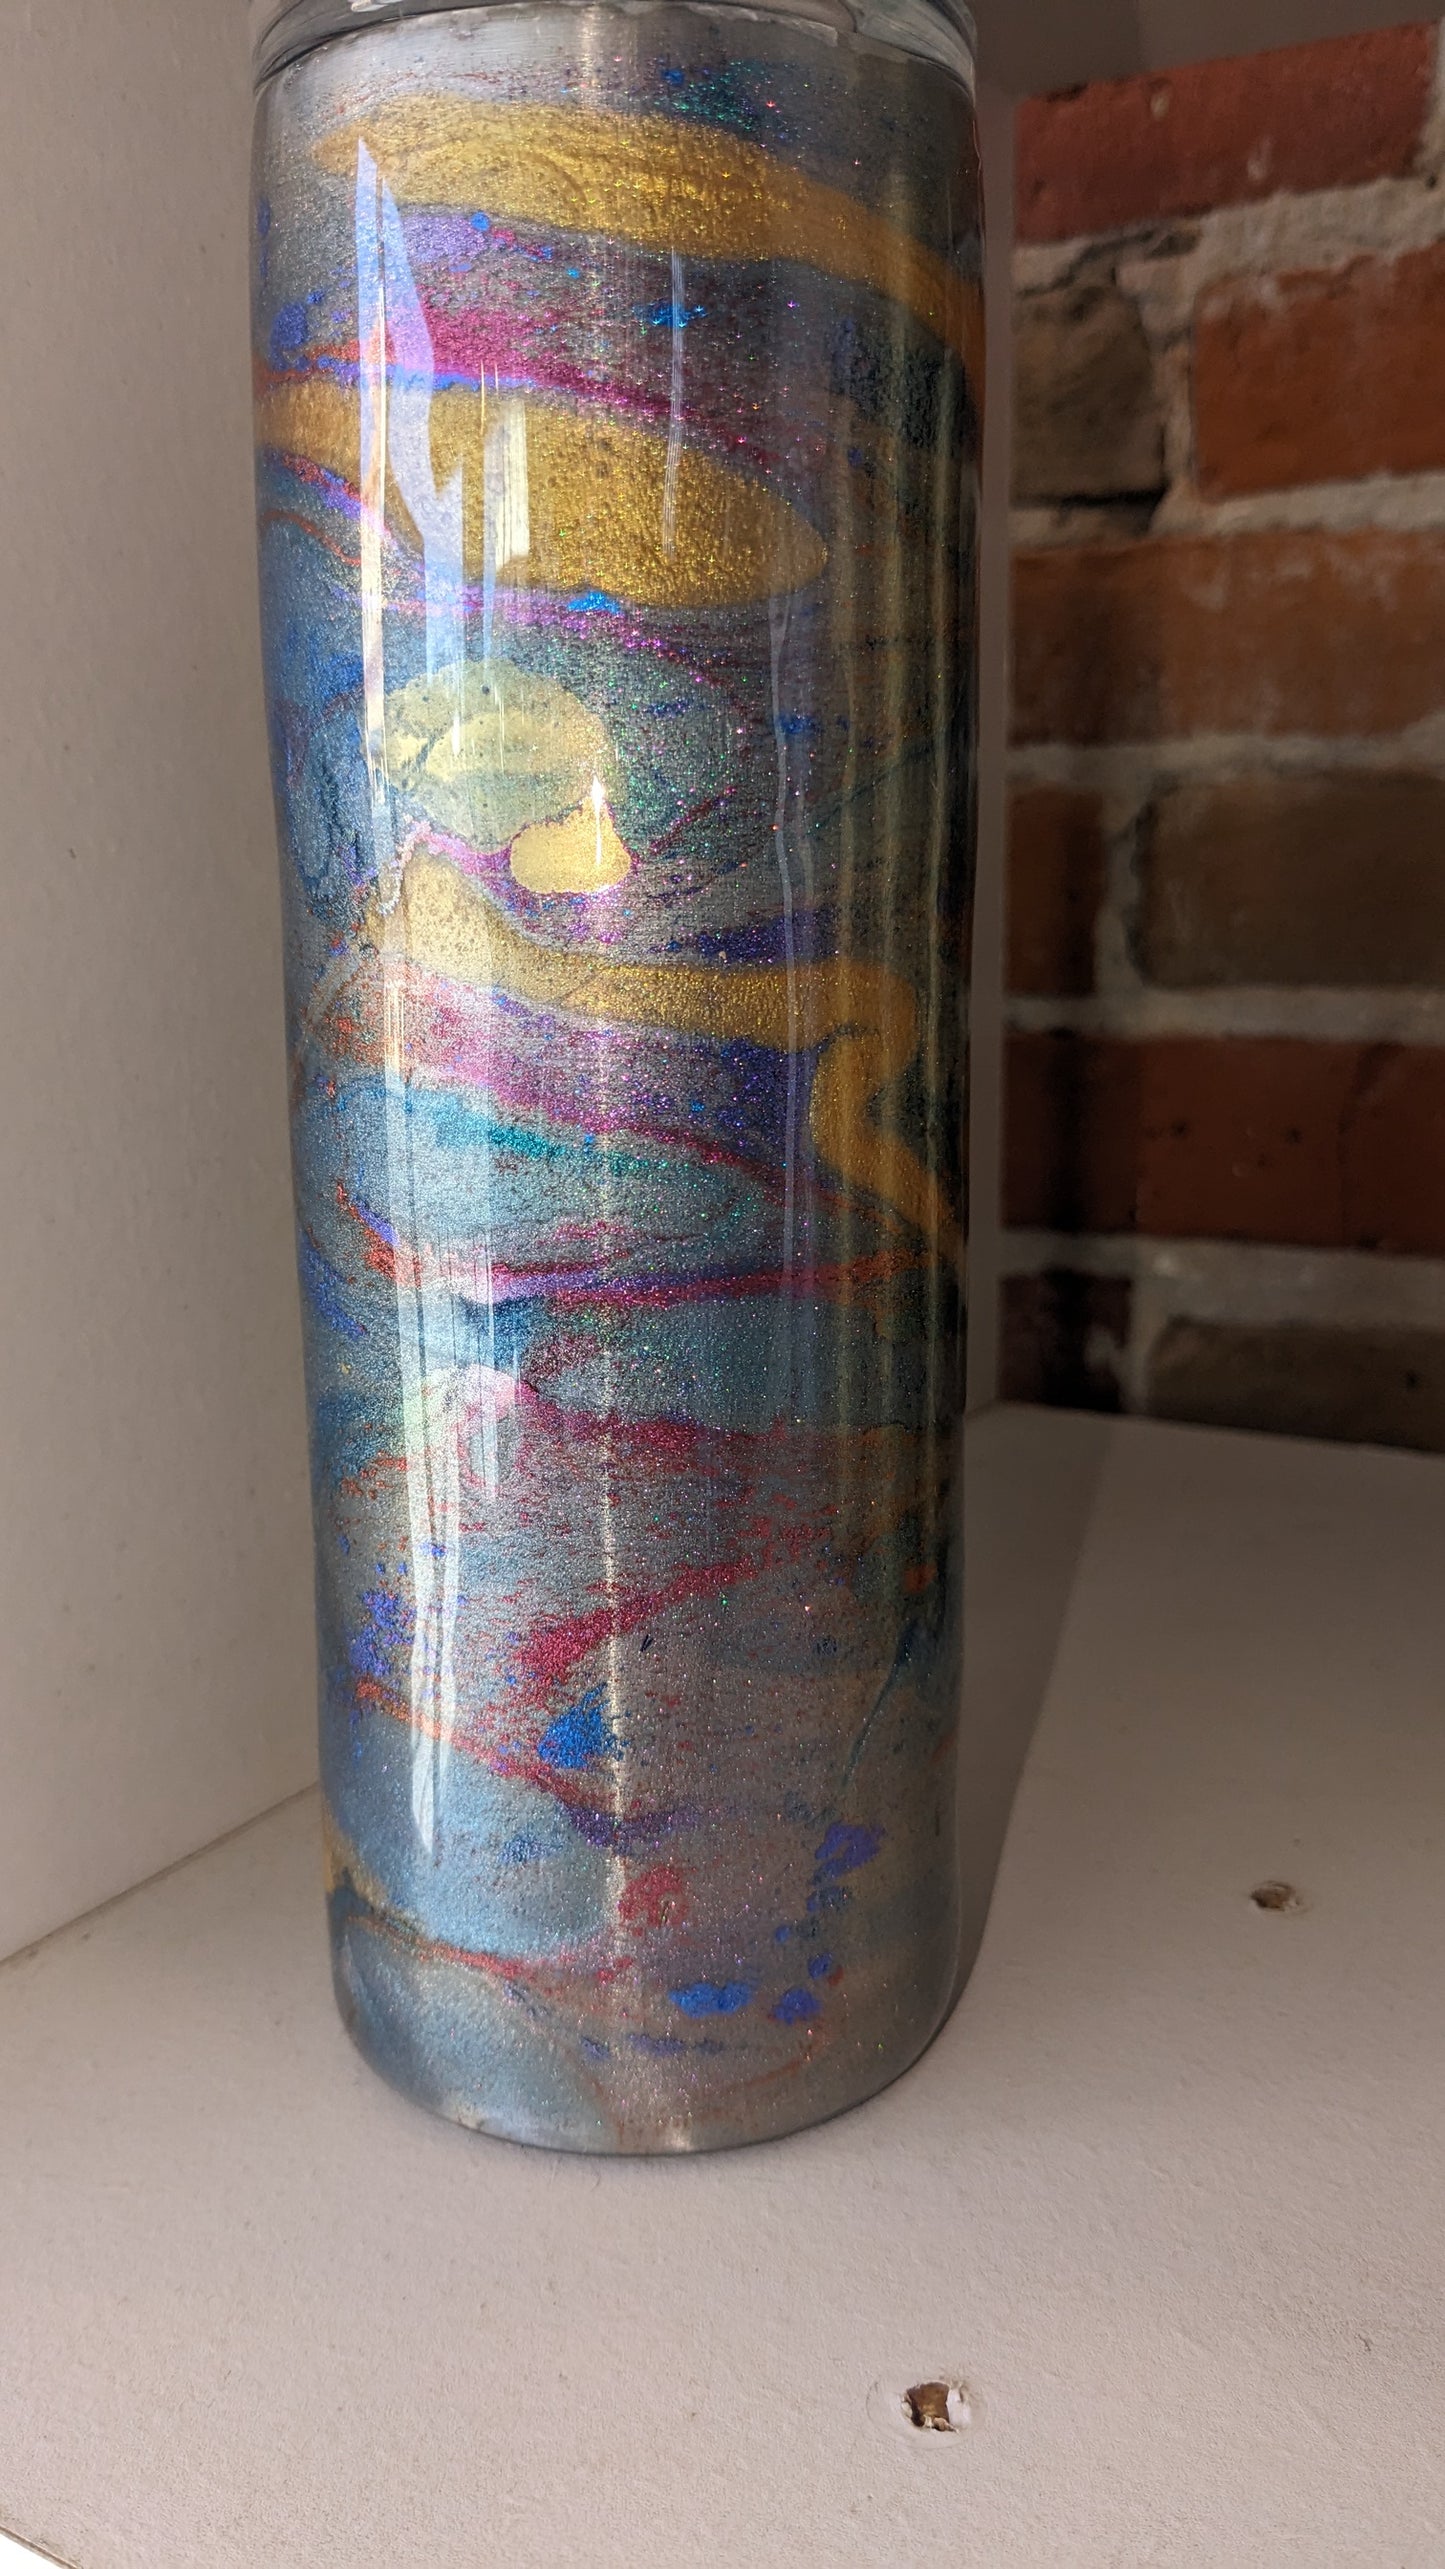 20 ounce stainless steel insulated mica powder art Tumbler pastel colors